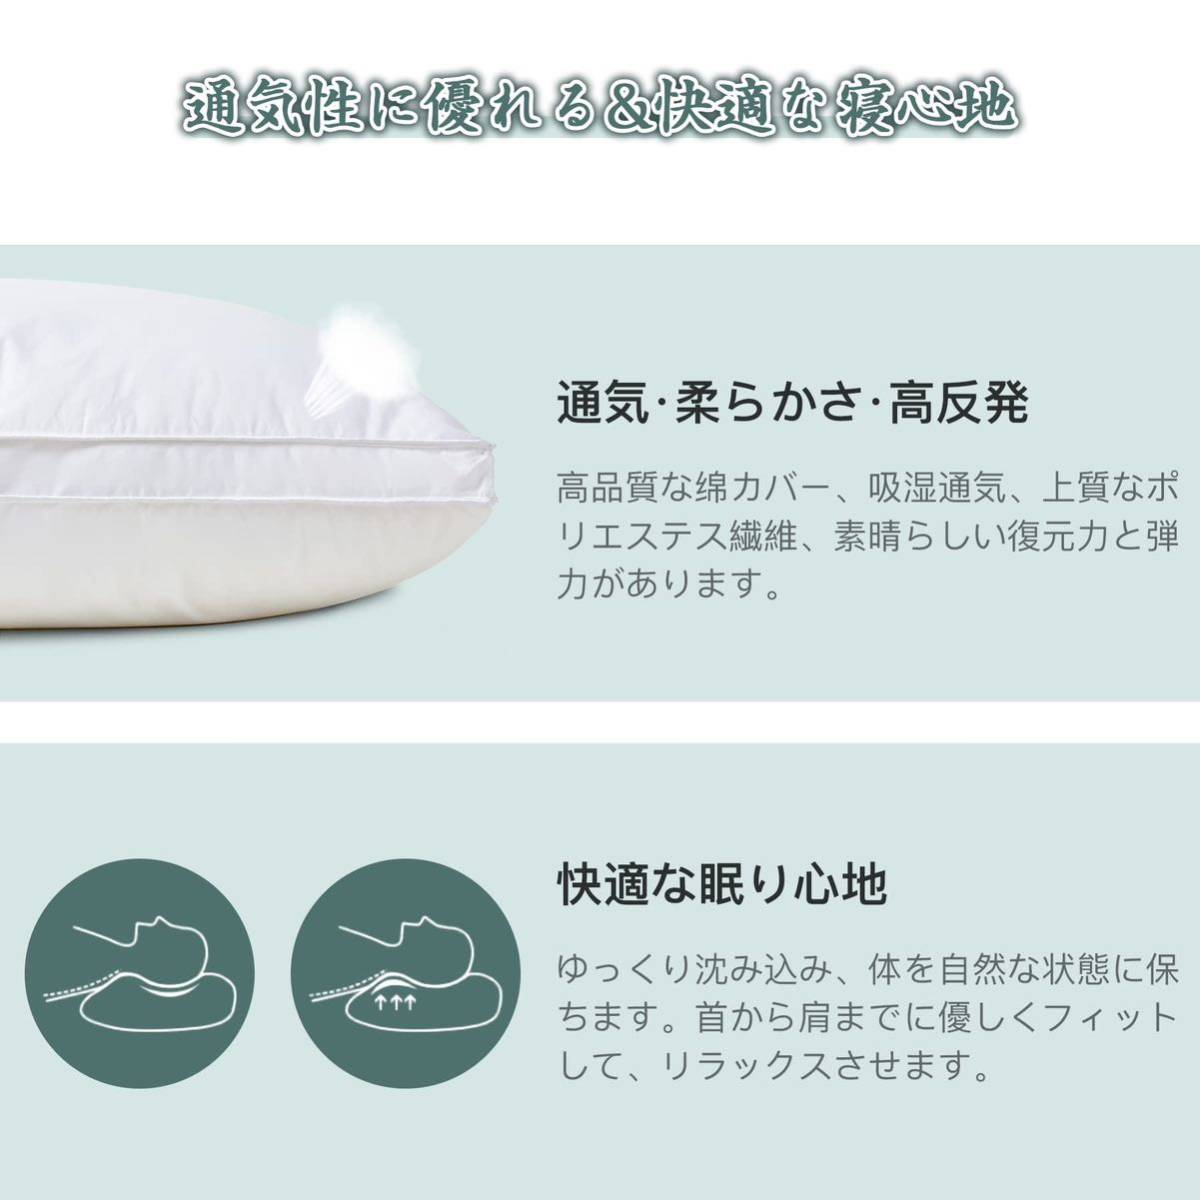 2 piece set pillow ... hotel specification height repulsion pillow width direction correspondence circle wash possibility solid structure white ( length 63cm* width 43cm height 20cm)